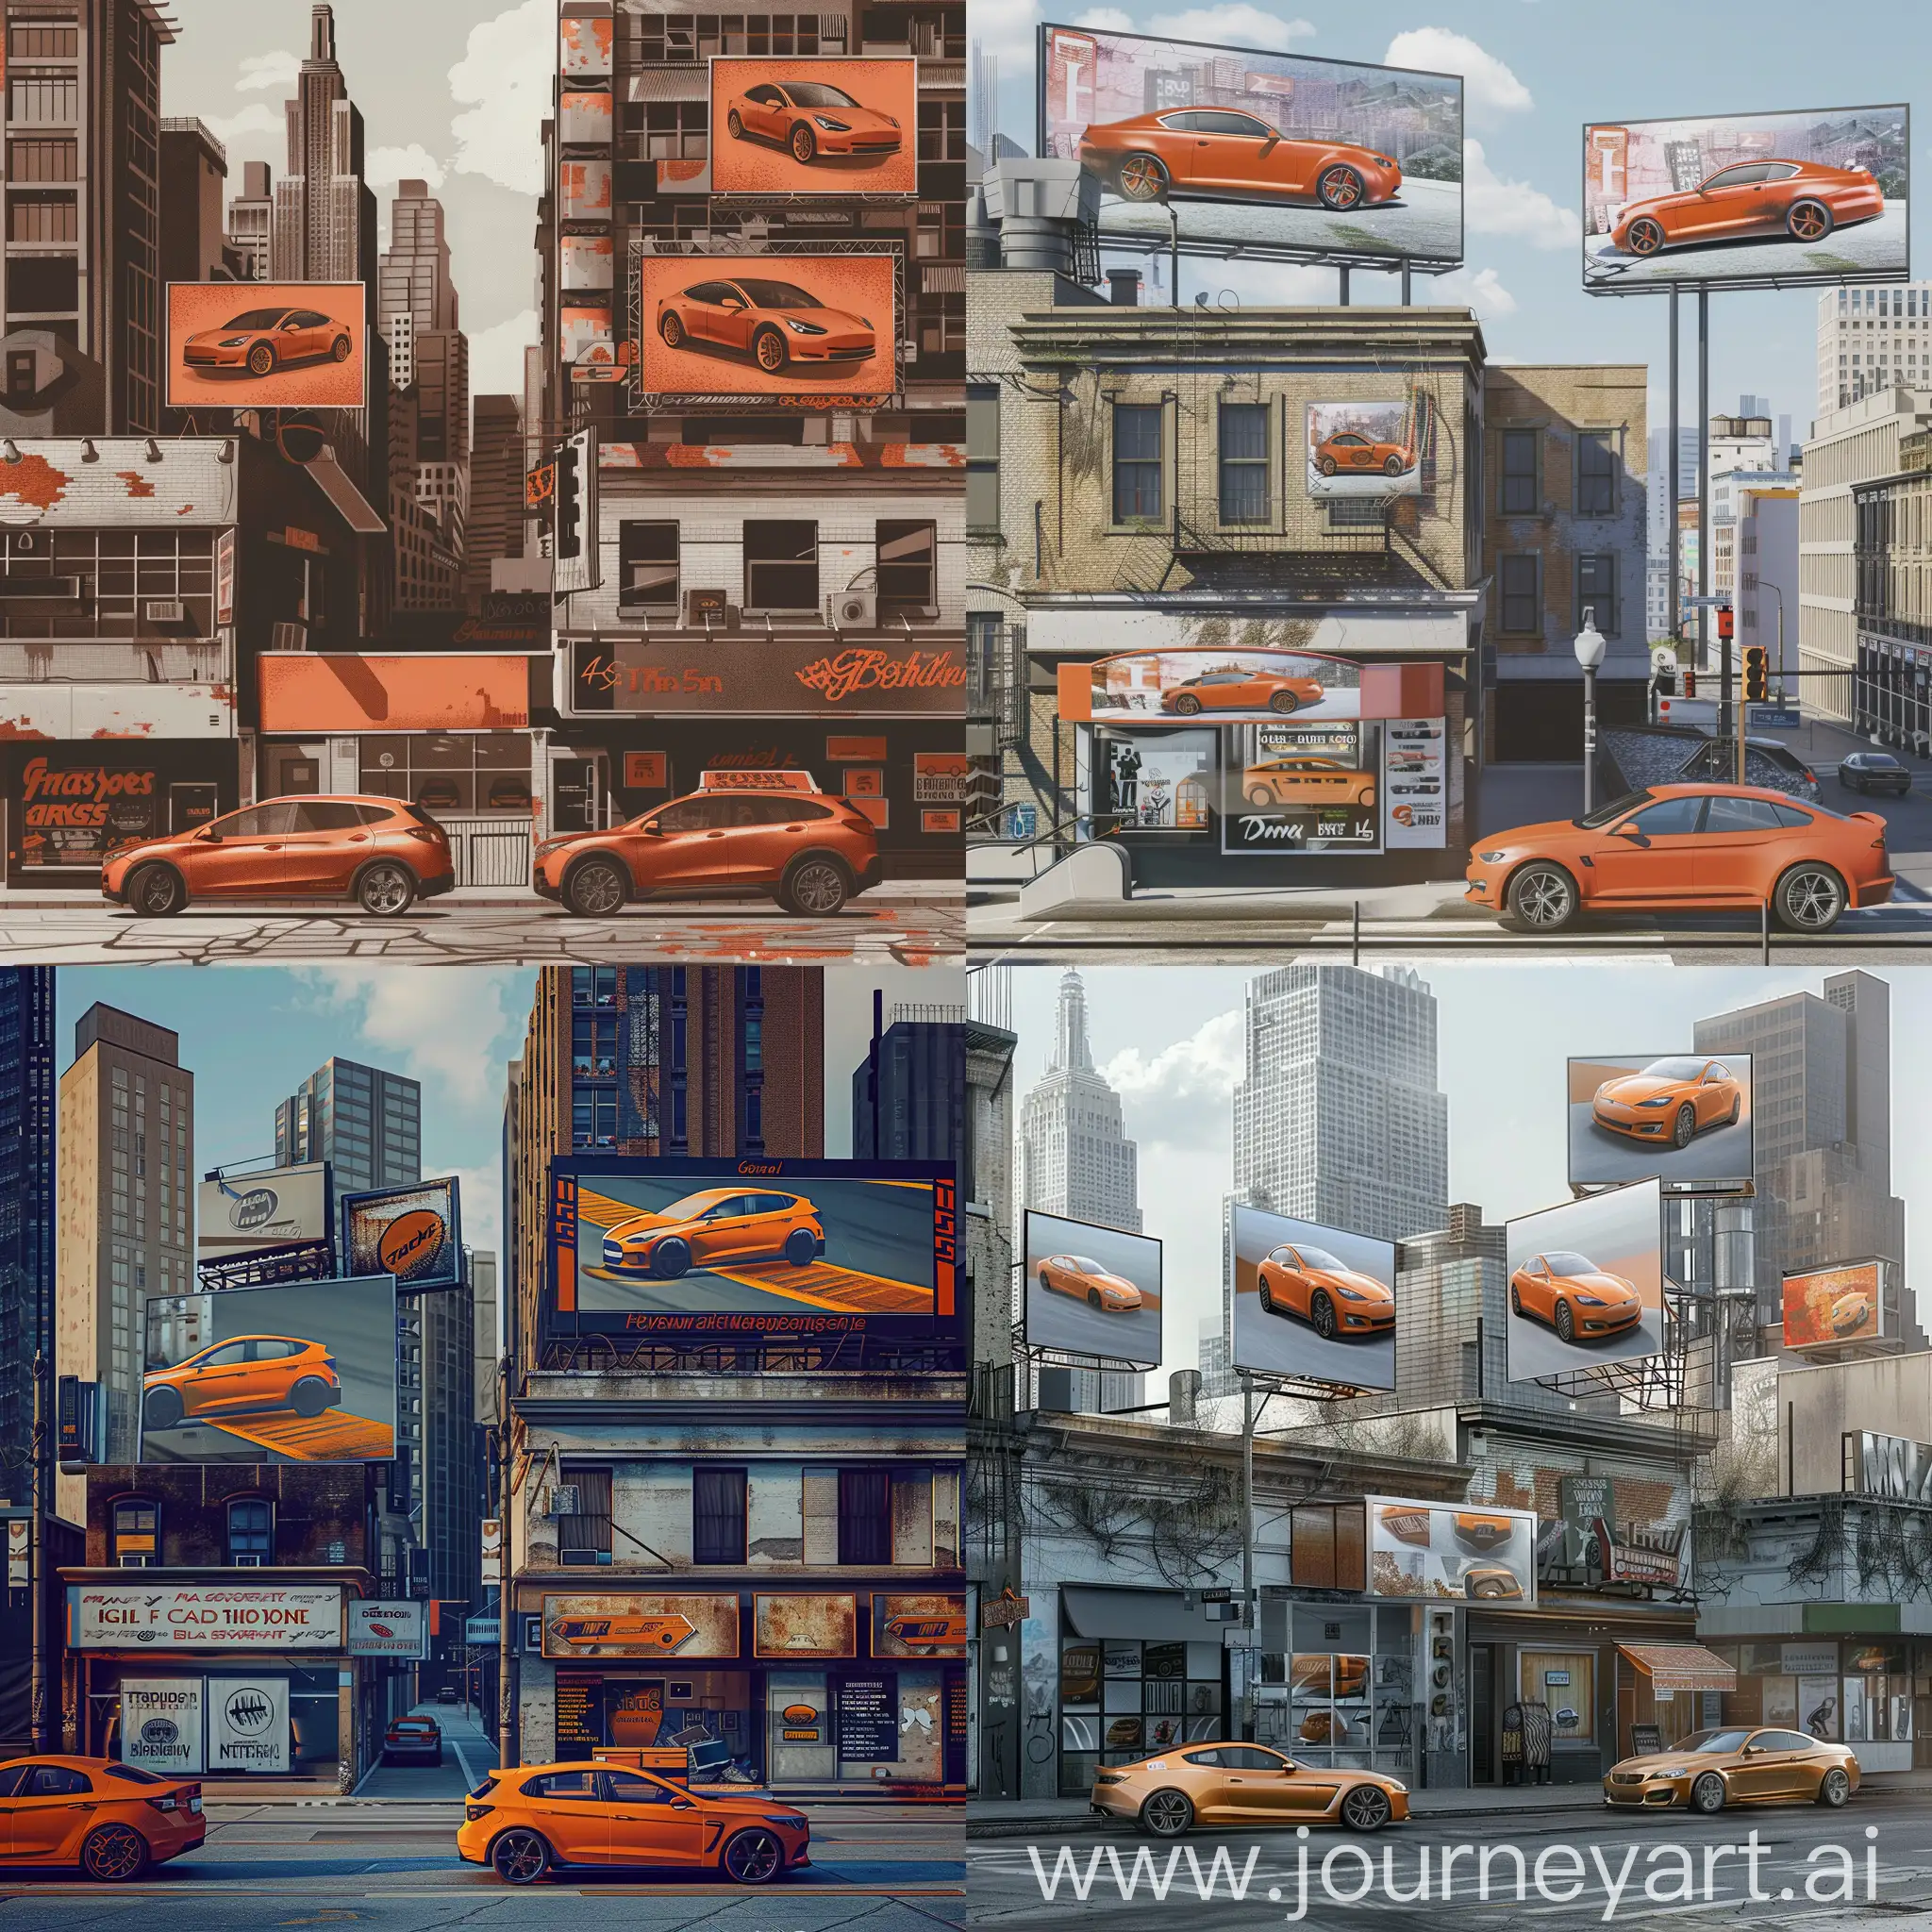 Generate an realistic image of a city with building with builboard, car shop with a window and a car all with a same graphic of a car in orange color